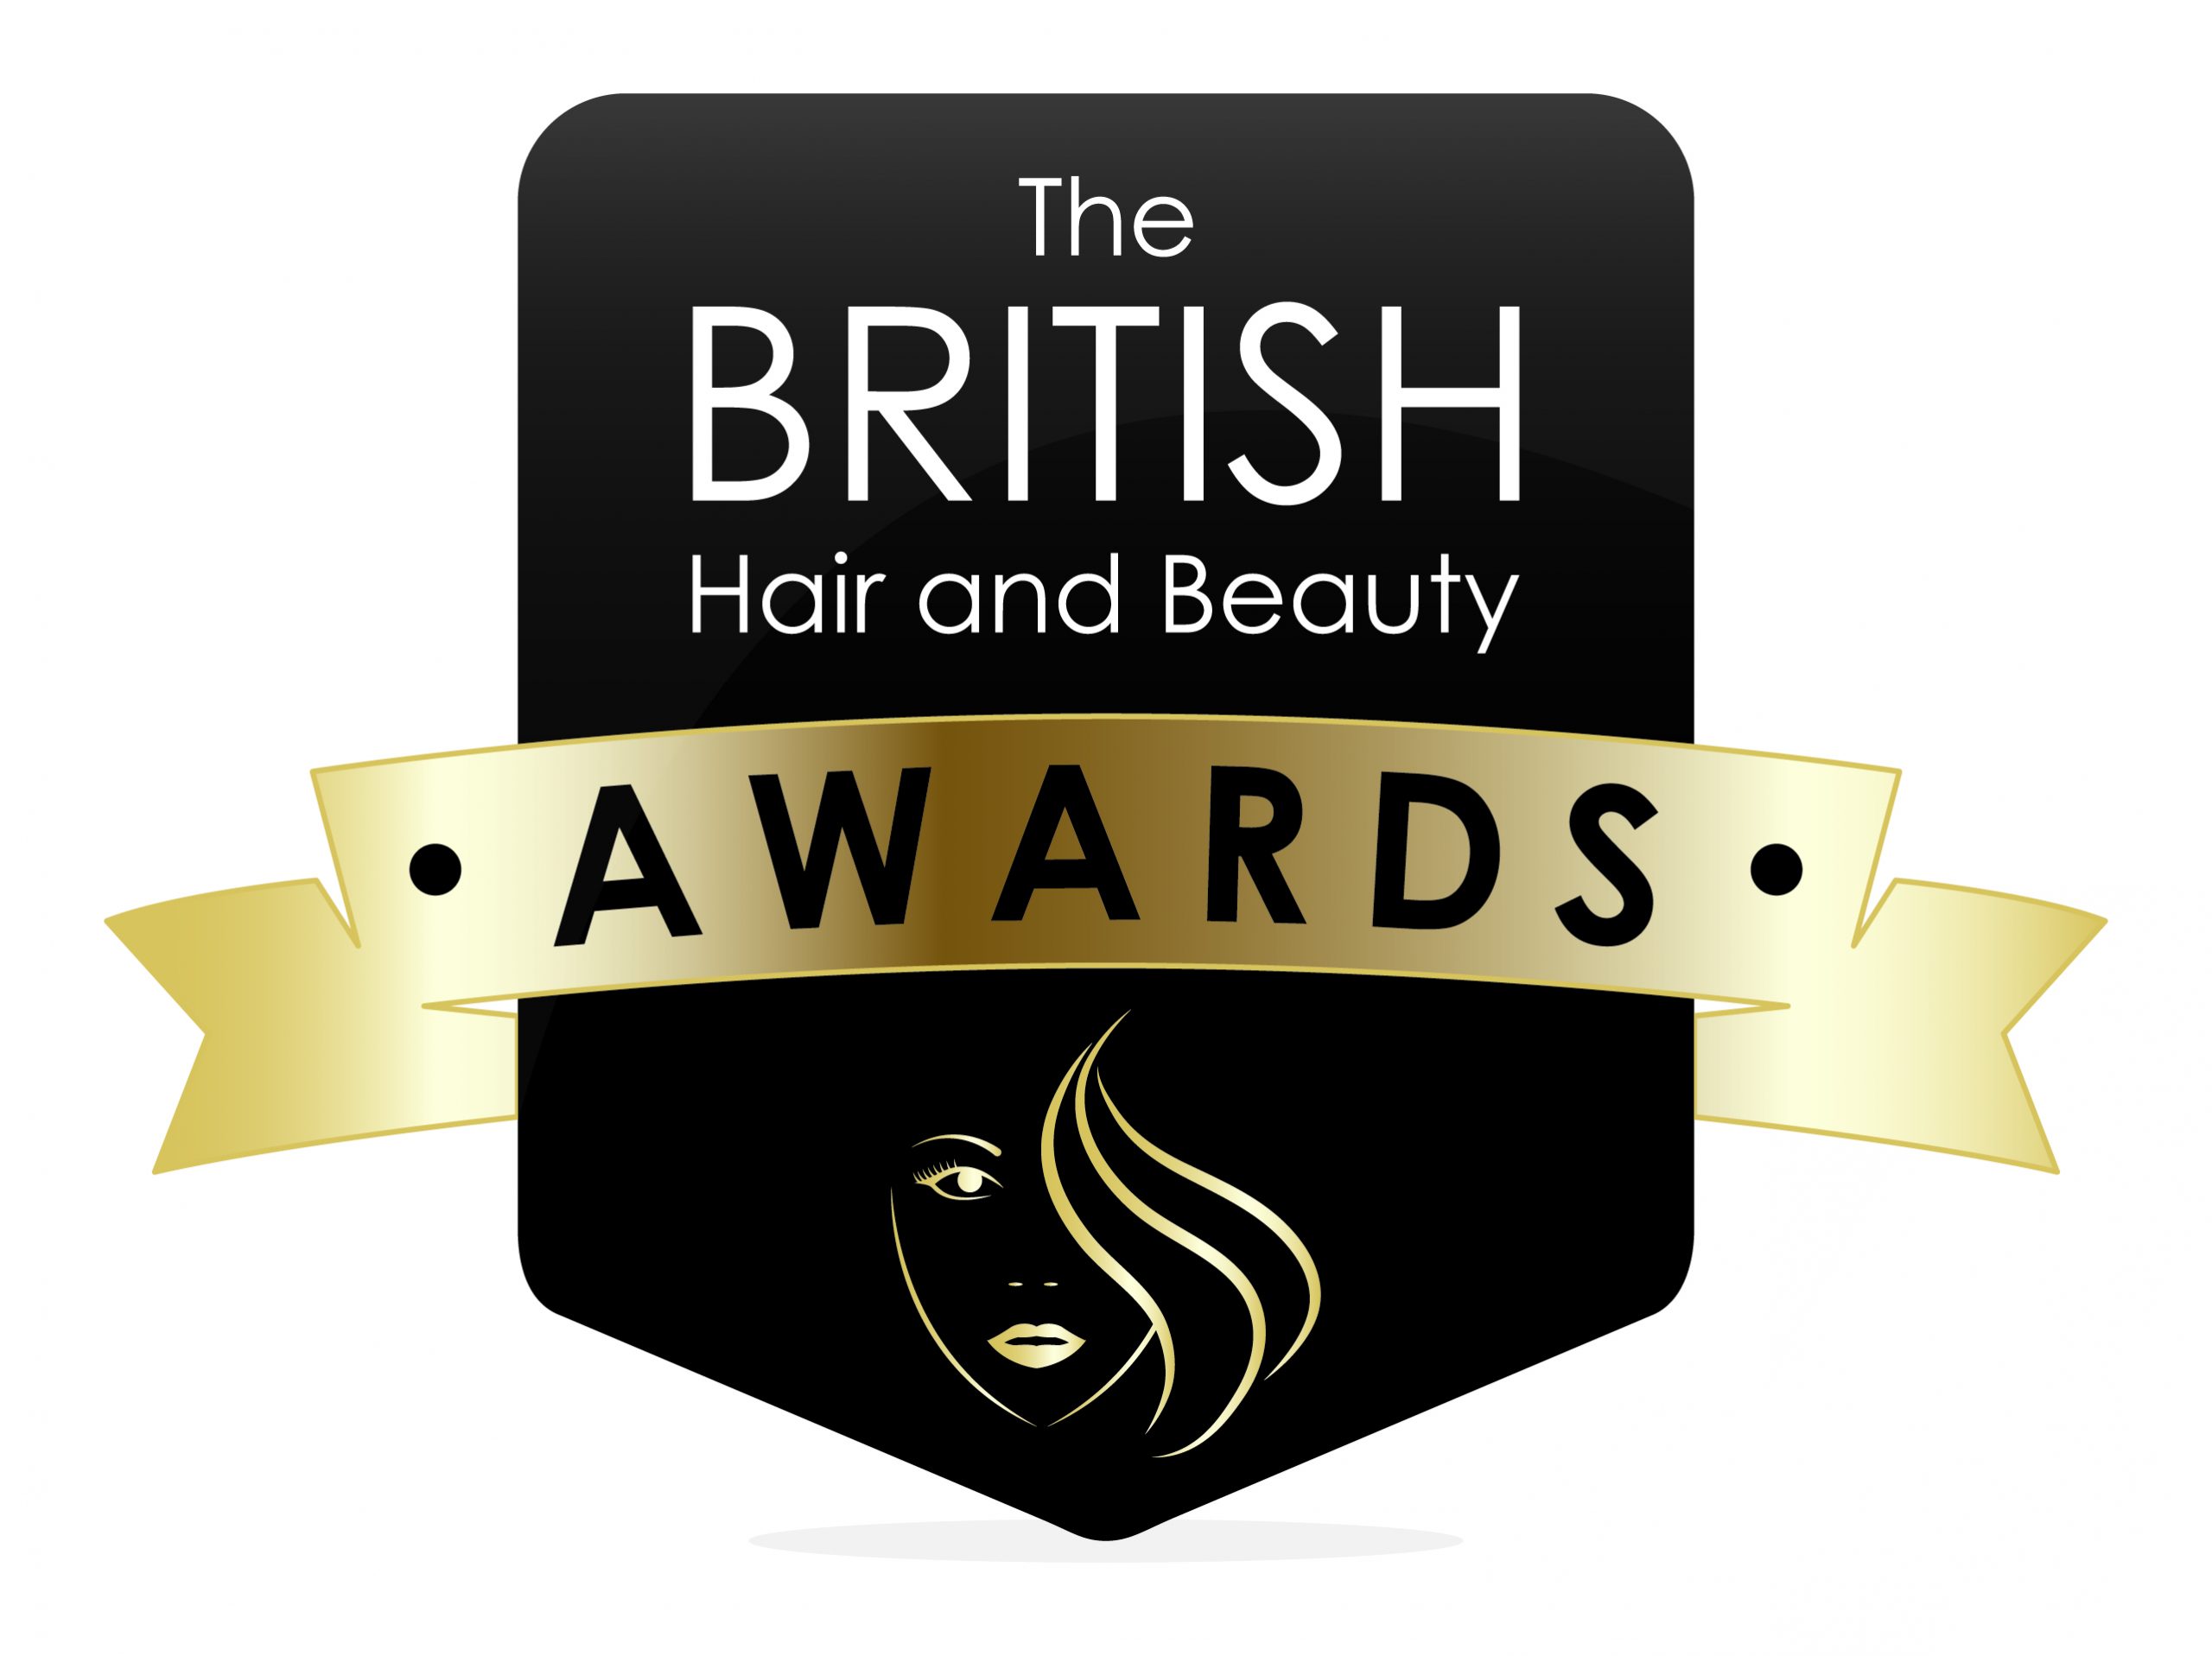 The British Beauty Awards Show Appreciation For Those In The Beauty Industry